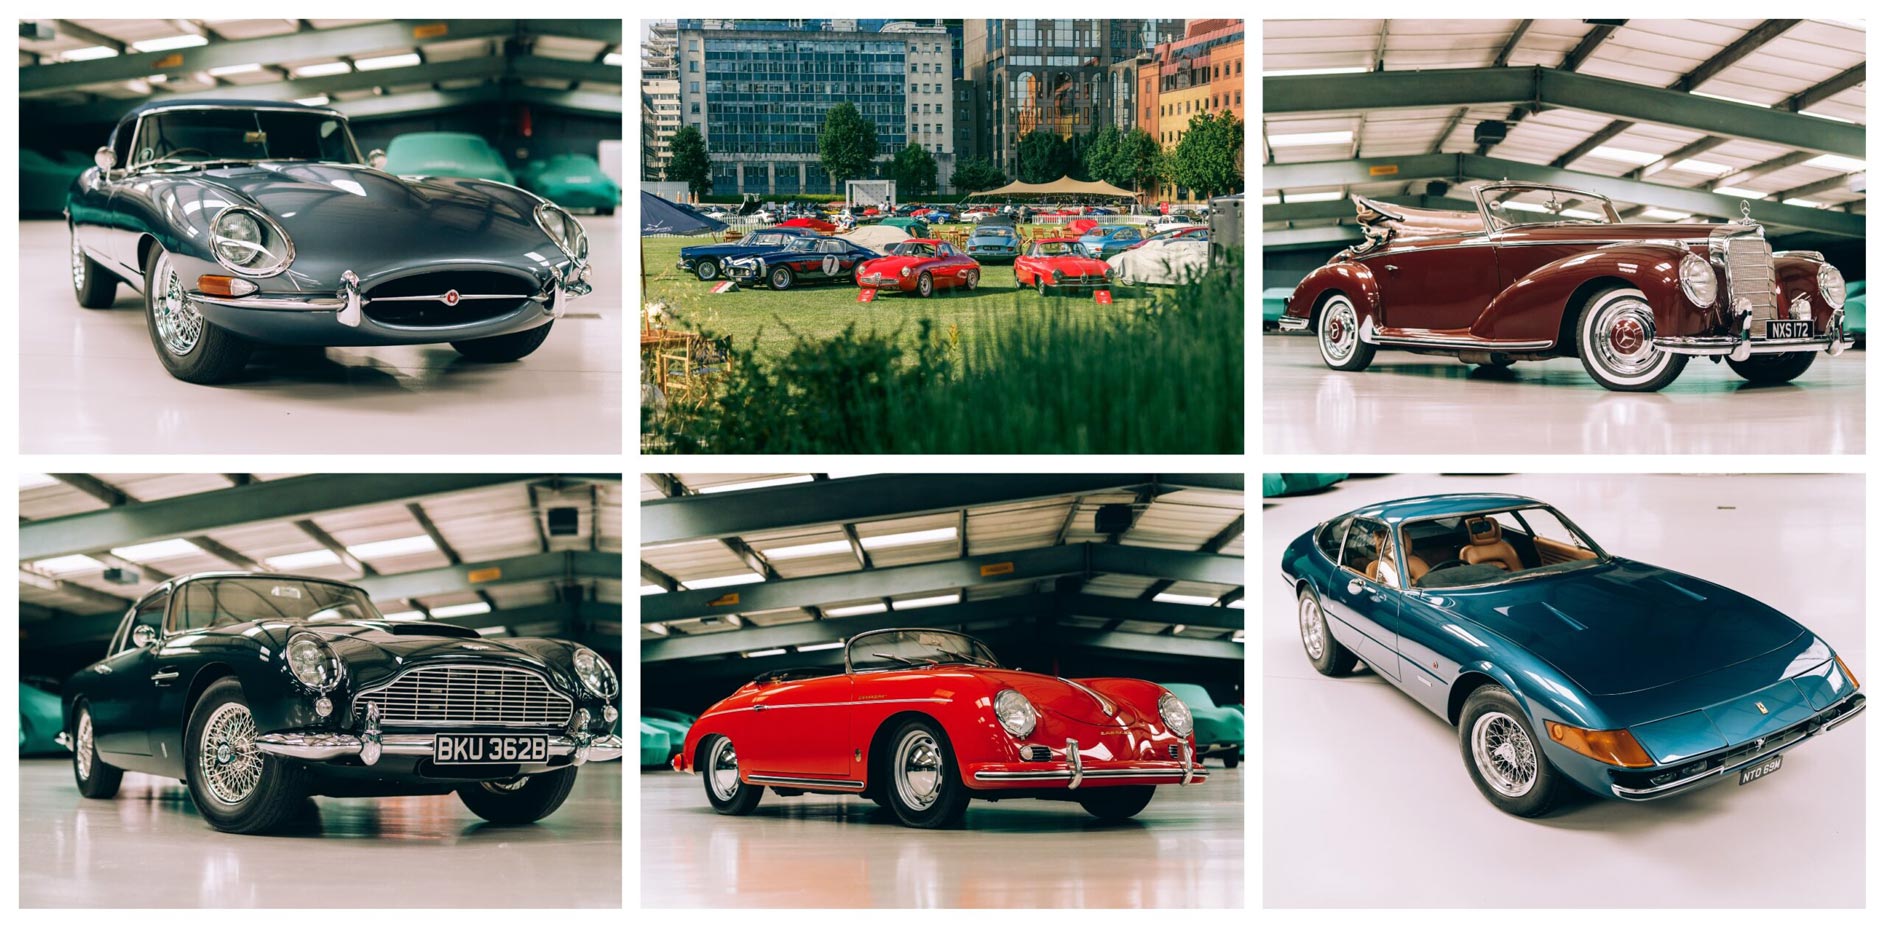 Sukhpal Ahluwalia's Collection of Cars Collage